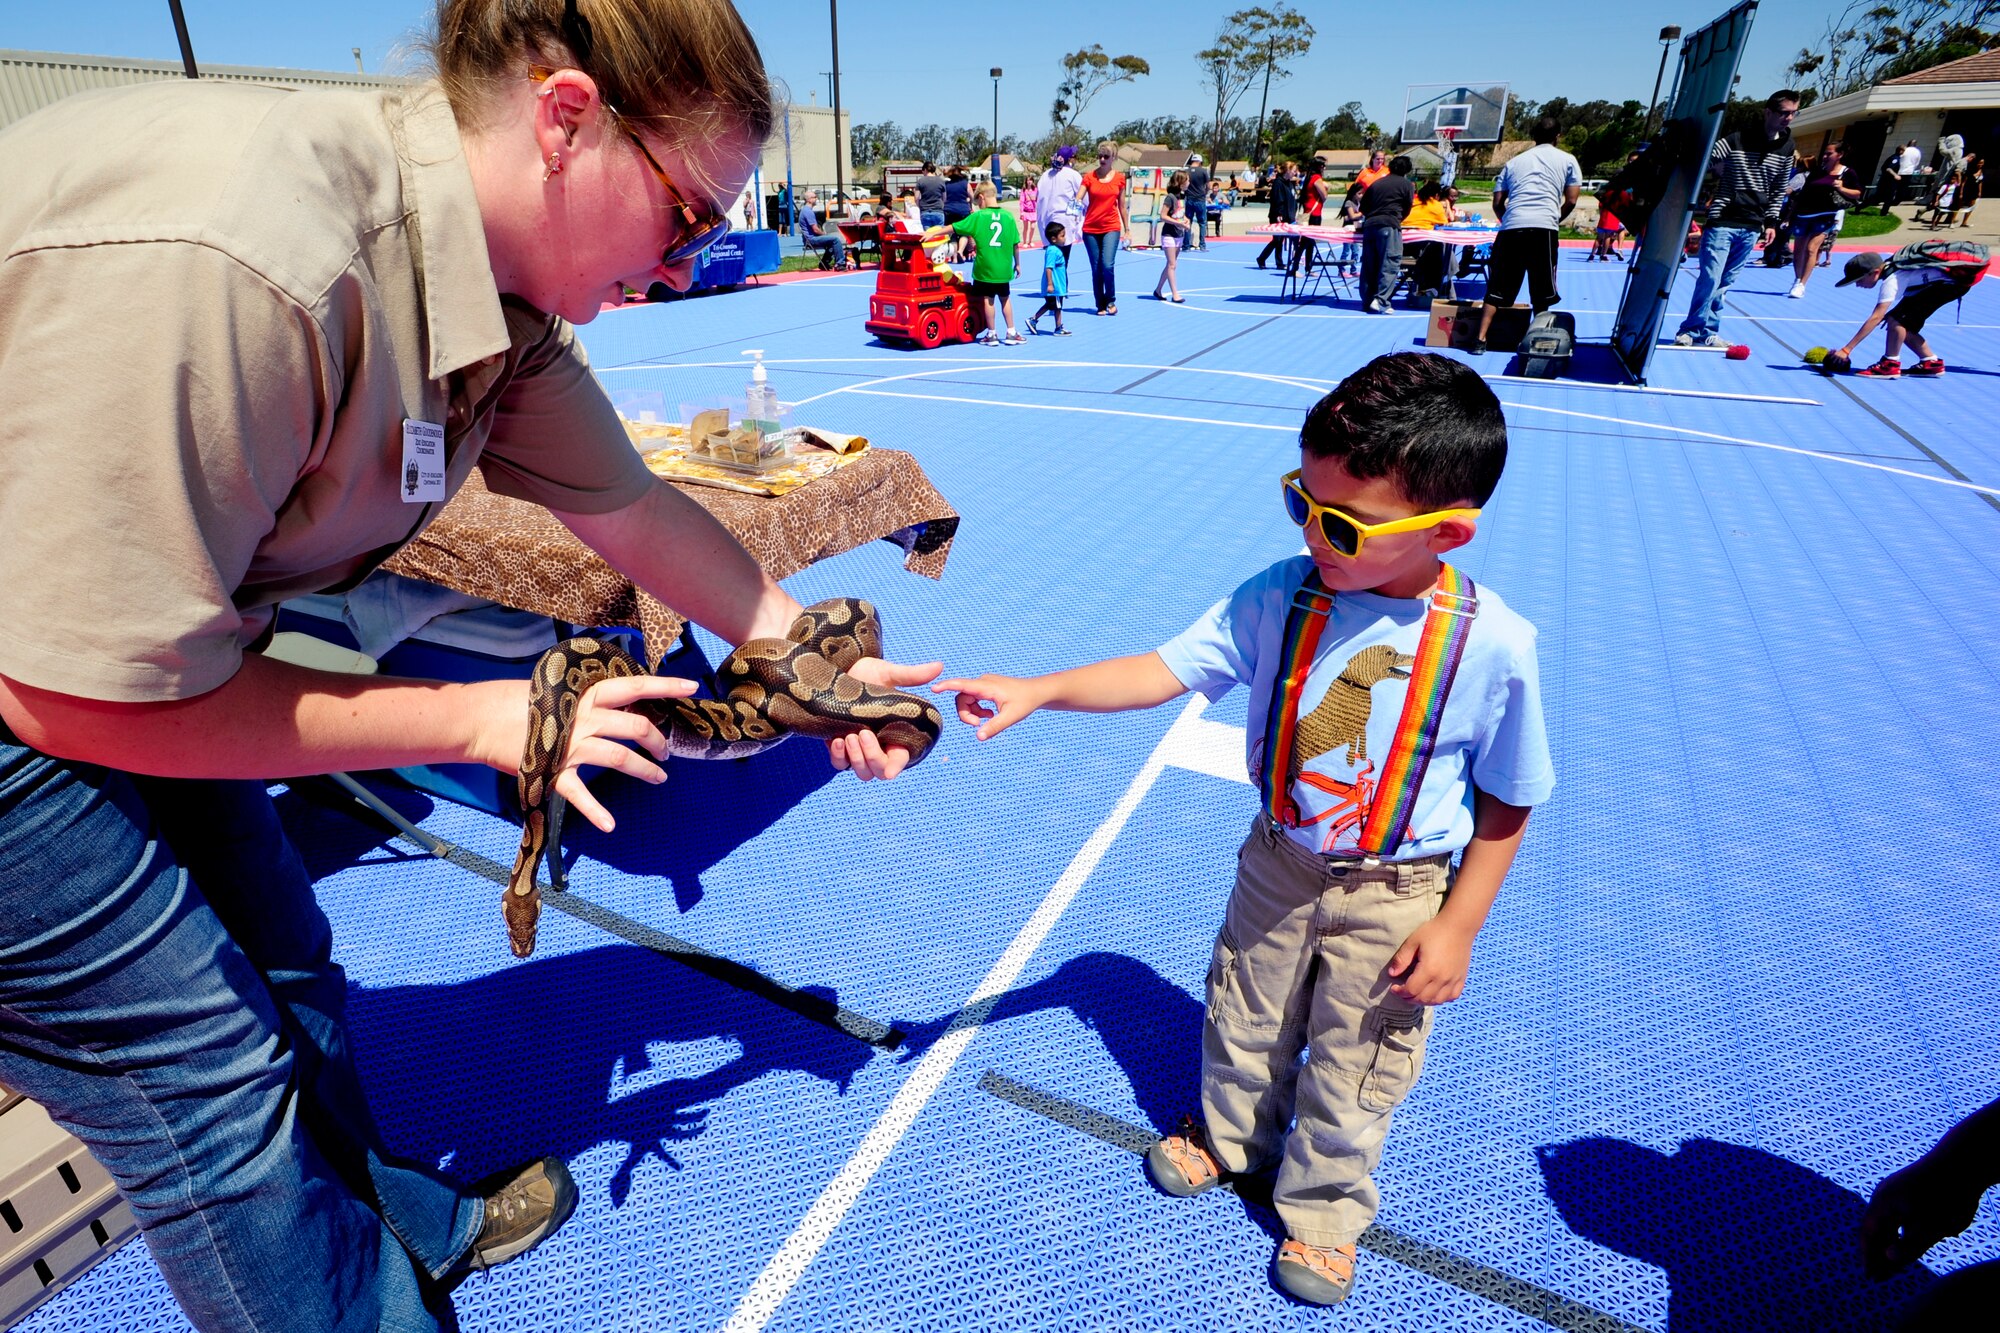 VANDENBERG AIR FORCE BASE, Calif. – Ryan Massaro pets a 13 year-old African Python from Charles Paddock Zoo during the 4th annual Salute to Youth event here Thursday, August 15, 2013. Salute to Youth was both an educational and family friendly event. It hosted the Exceptional Family Member Program, local schools, Backpack Brigade, food, games and prizes. (U.S. Air Force photo/Airman Yvonne Morales)